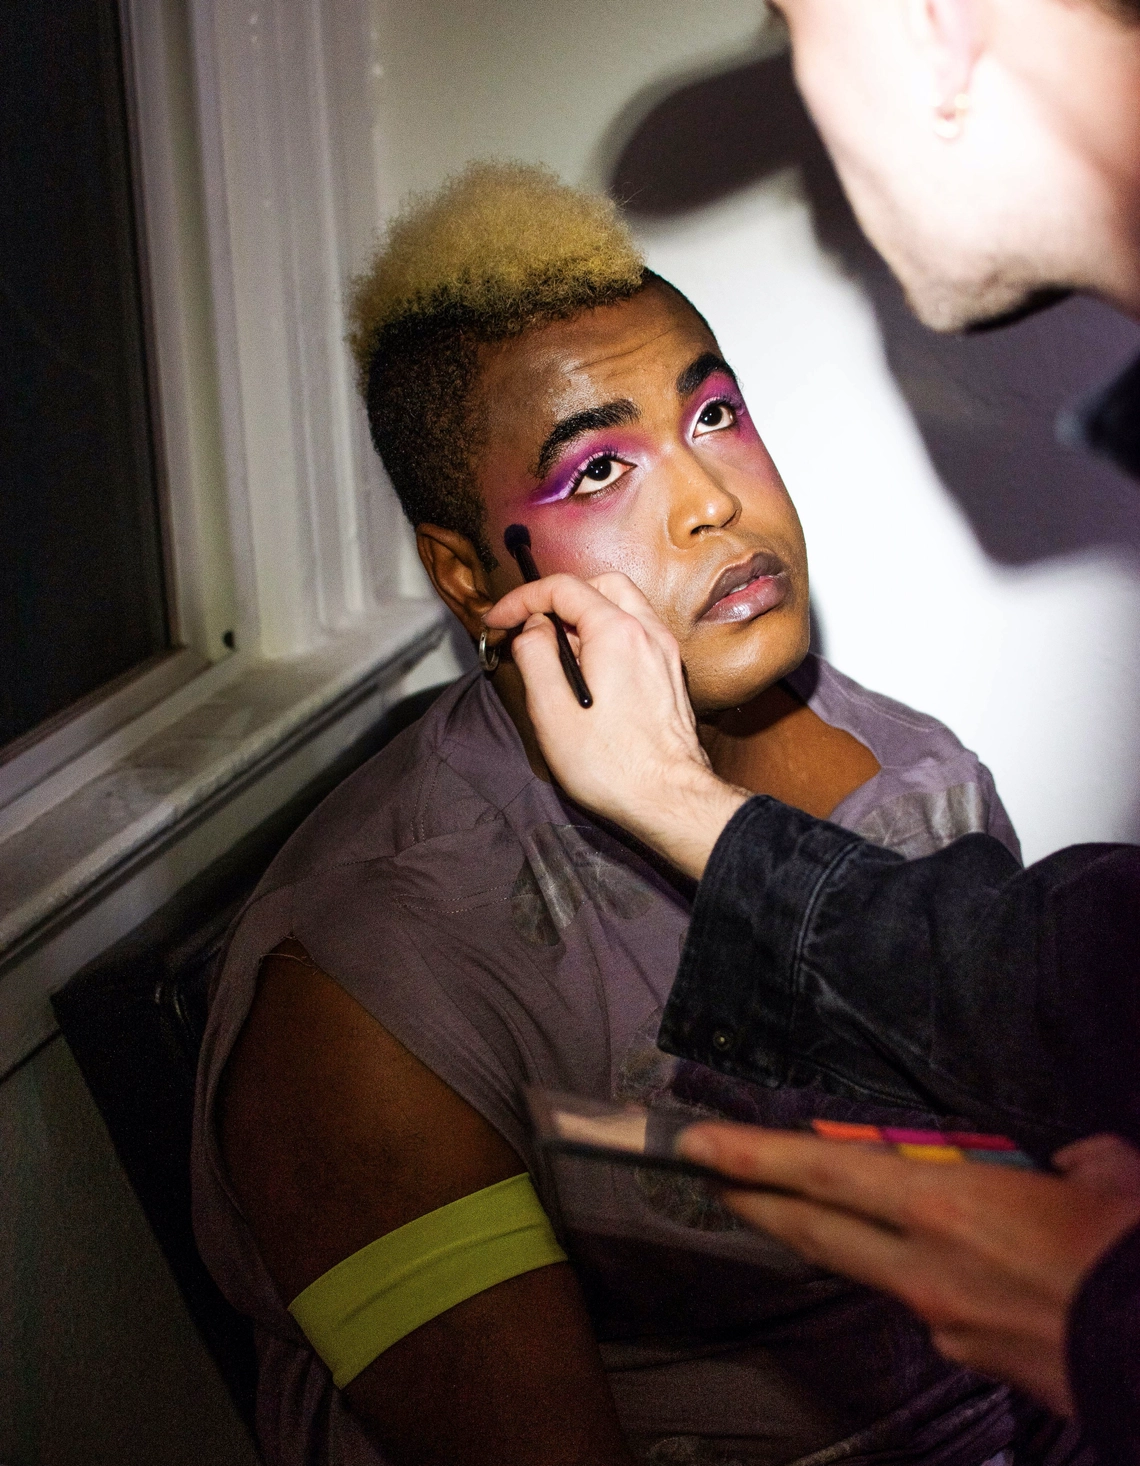 DJ Miss Parker getting their makeup done by Jesse Clark, looking up at Jesse while eyeshadow is applied